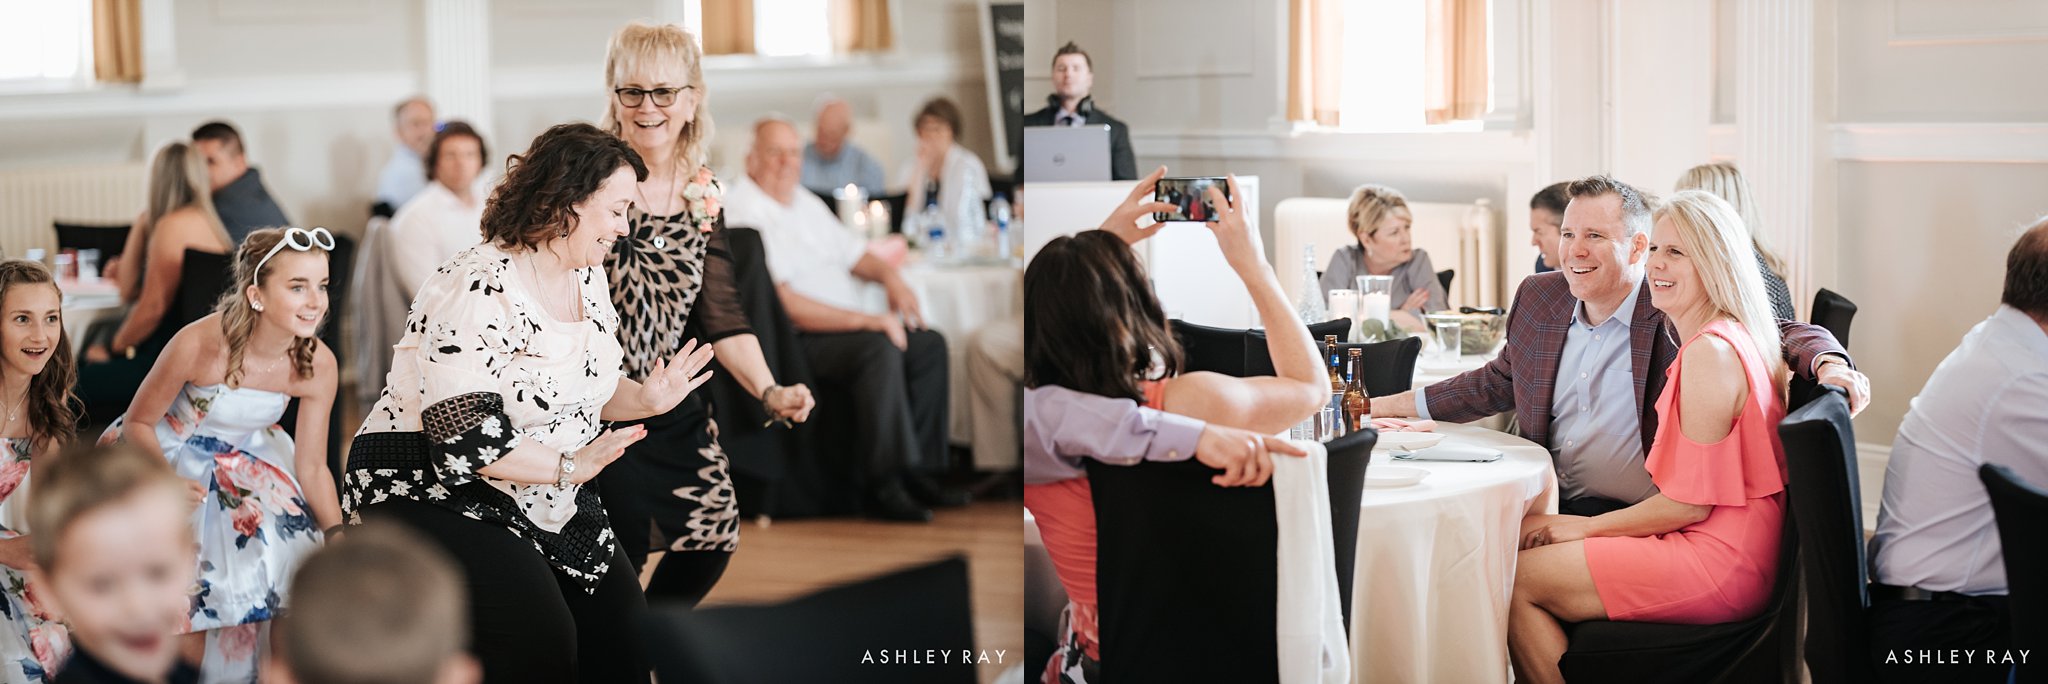 Sunny Spring Summer Wedding Photography at The Venue at Anthony's in Downtown Wapakoneta, Ohio